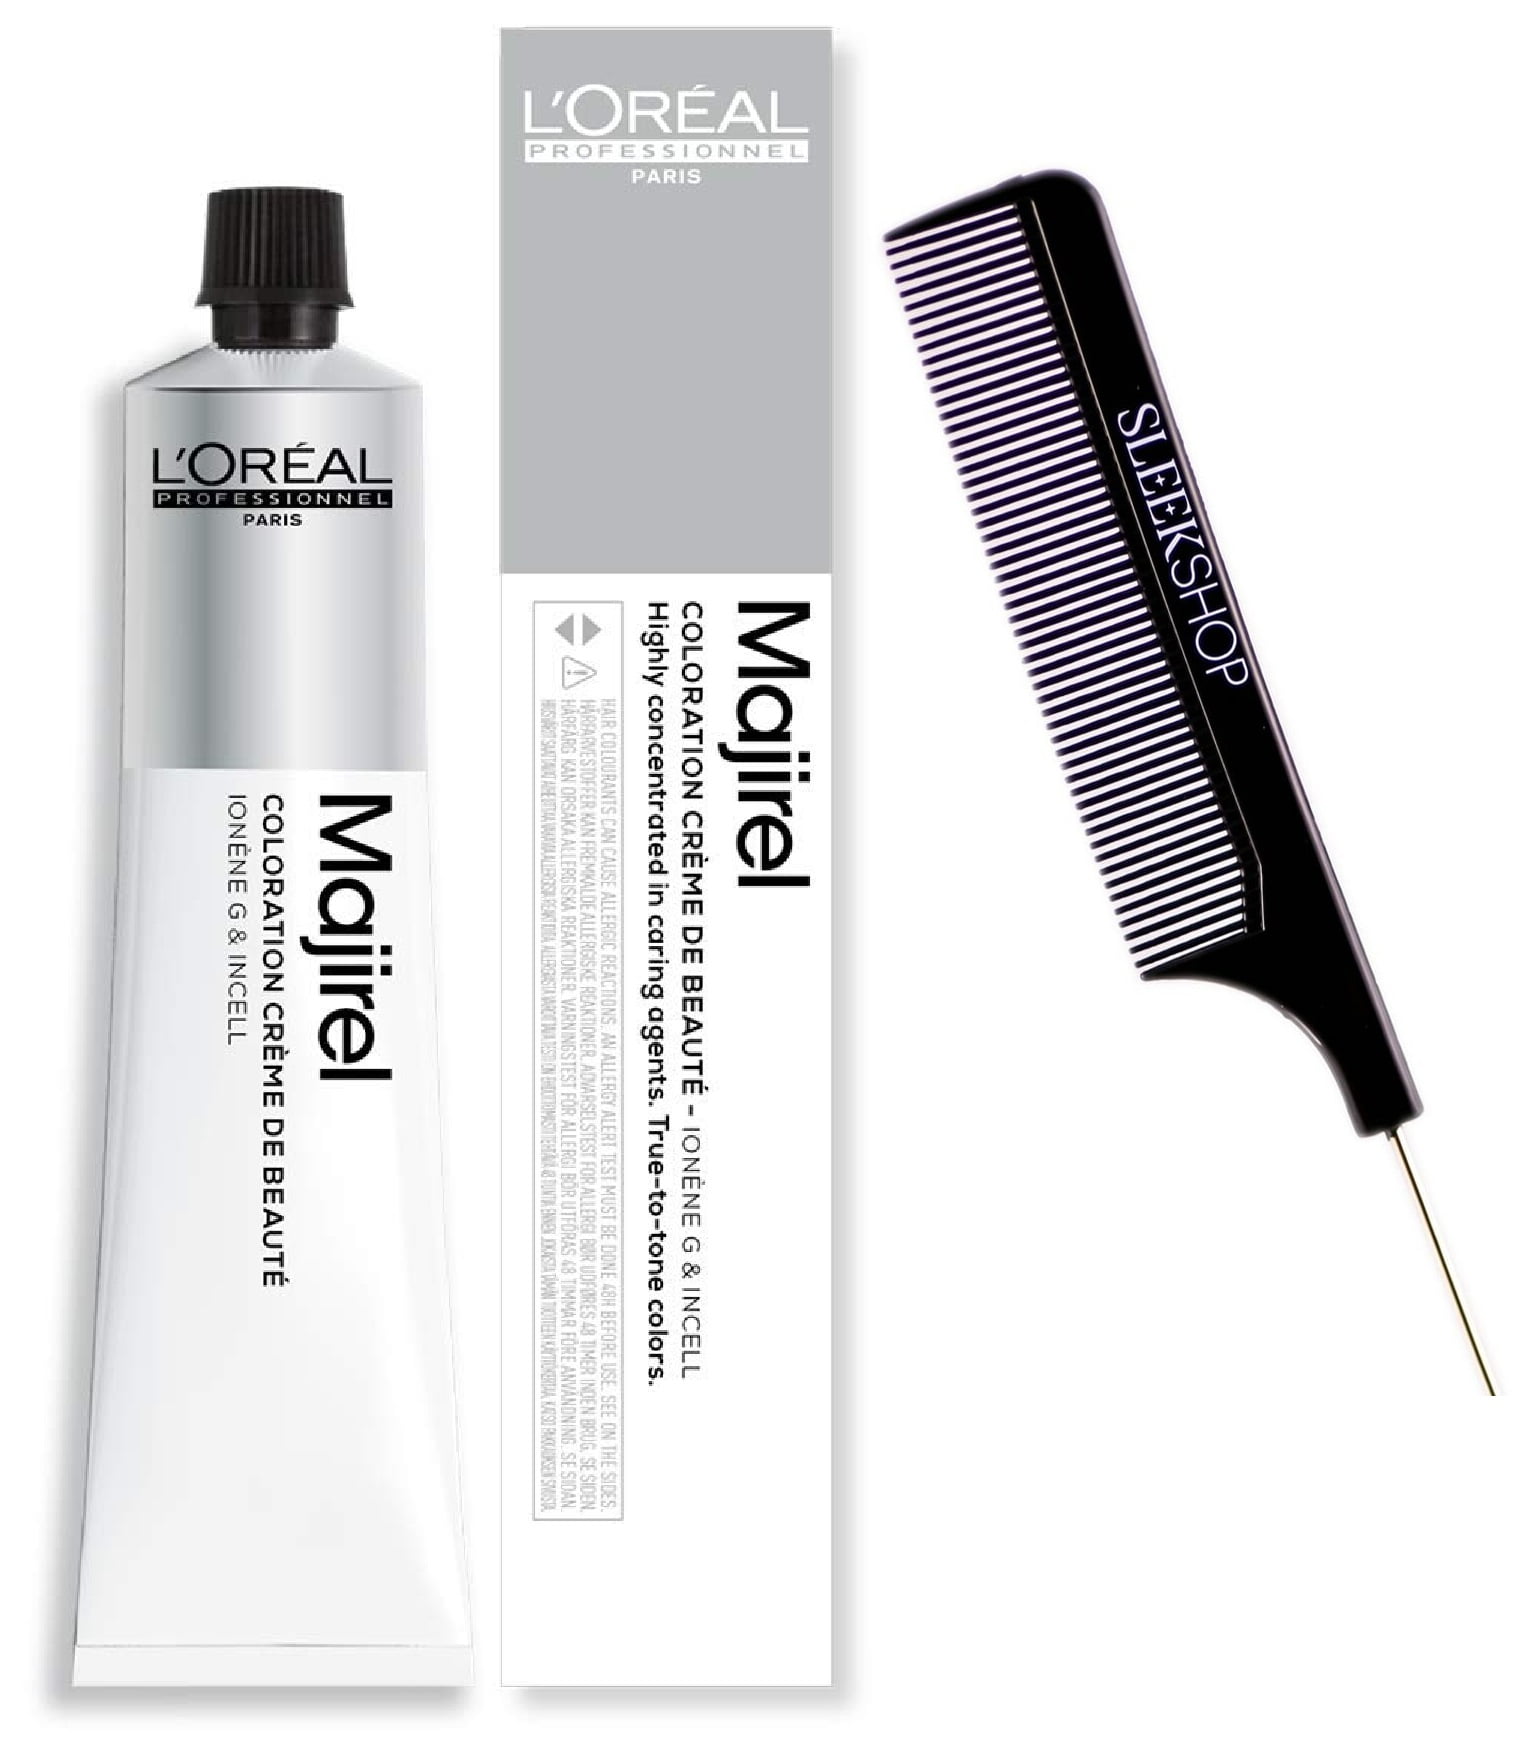 9 / 9N , L'oreal MAJIREL Professional Cream Permanent Hair Color Dye  Haircolor Ionene G & Incell Loreal - Pack of 3 w/ Sleek Pin Comb -  